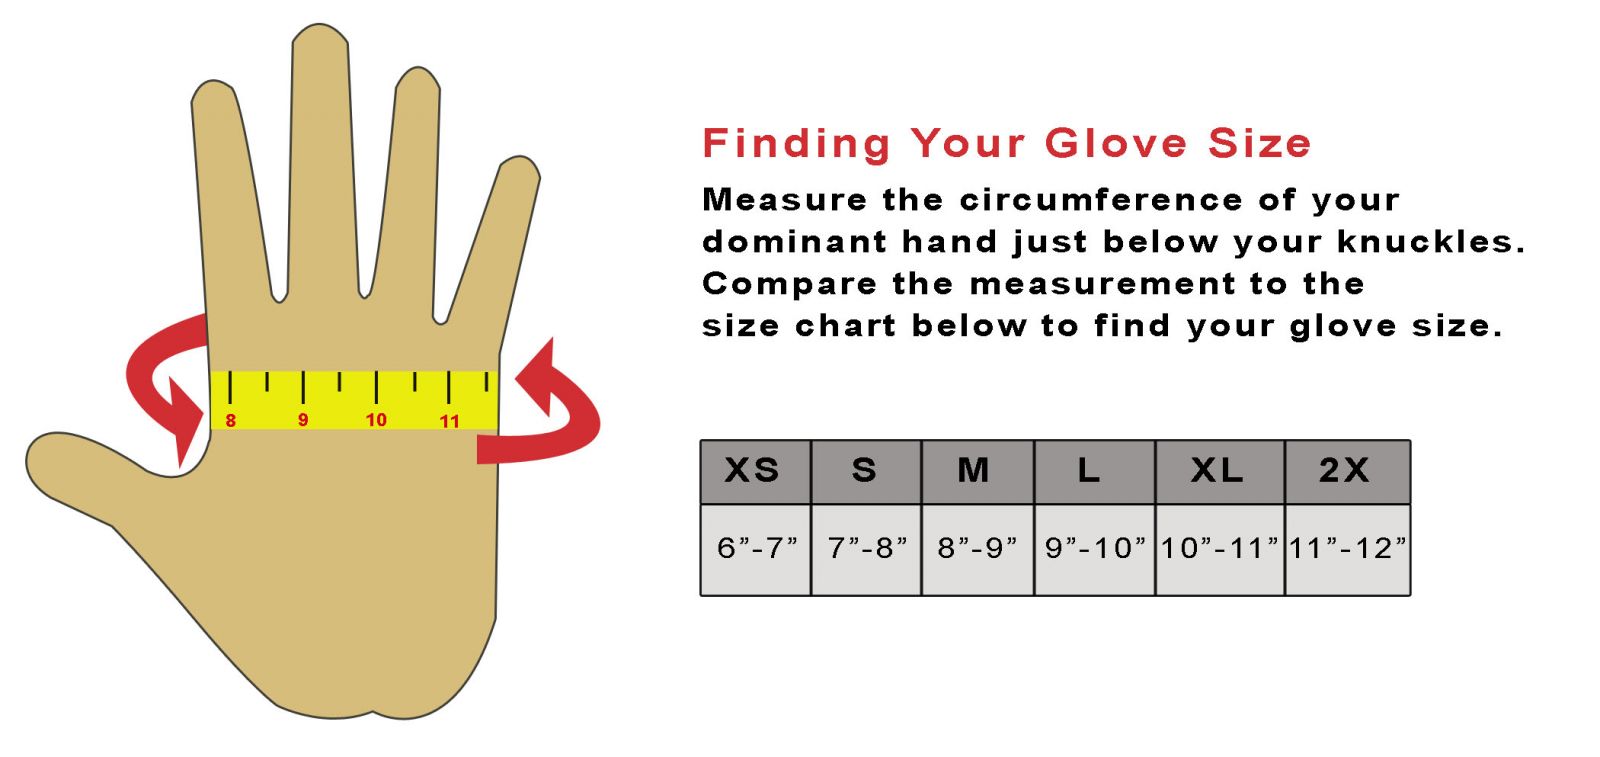 Or Glove Size Chart